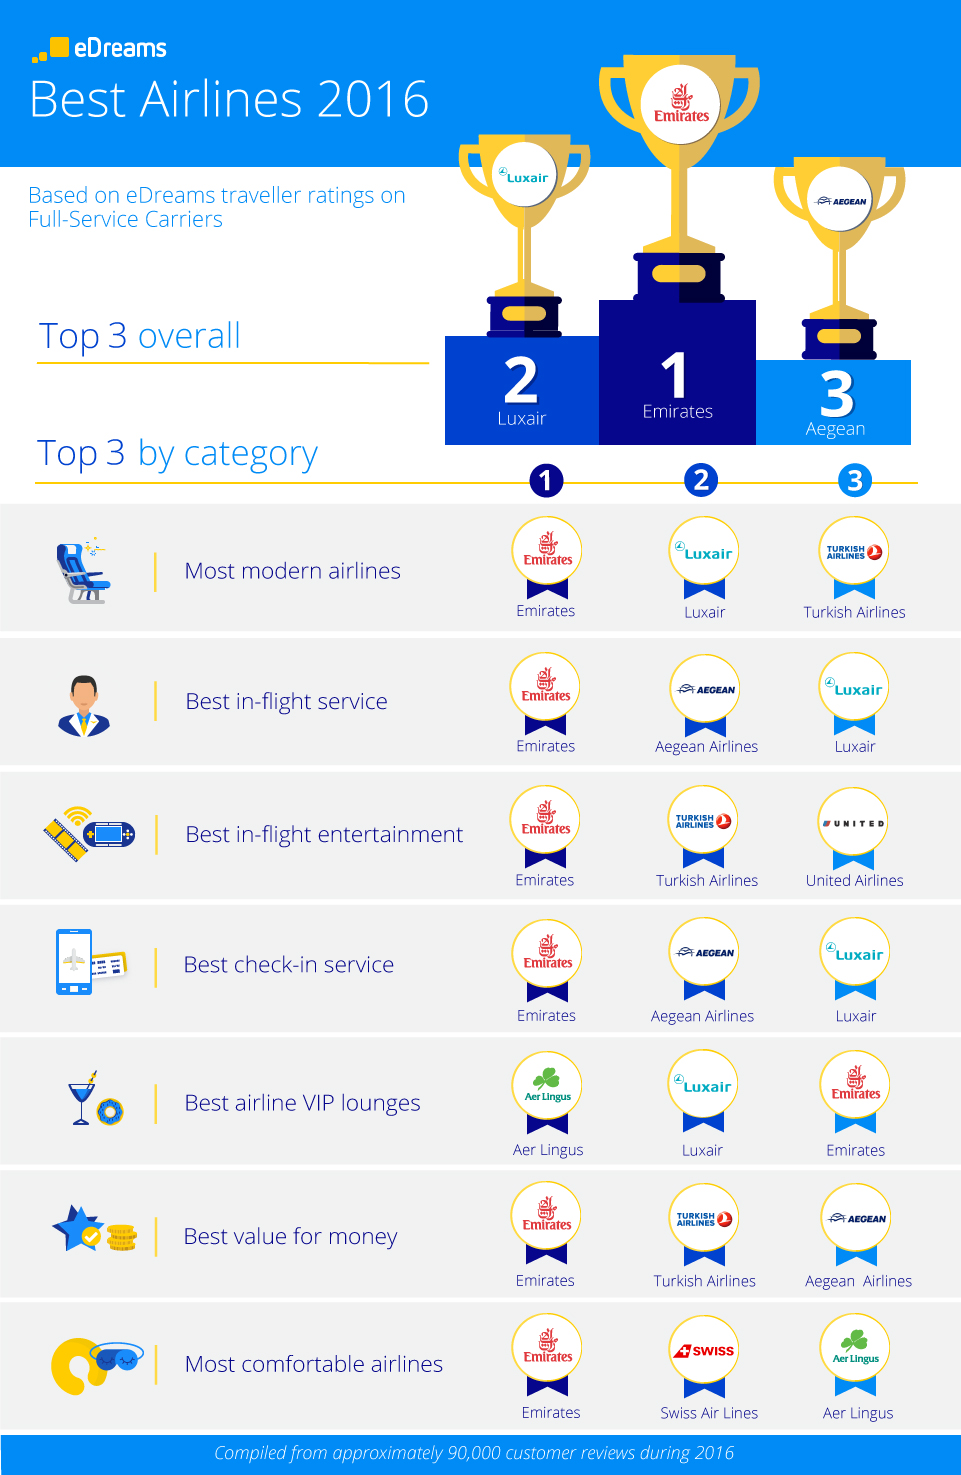 The best airlines of the world - eDreams